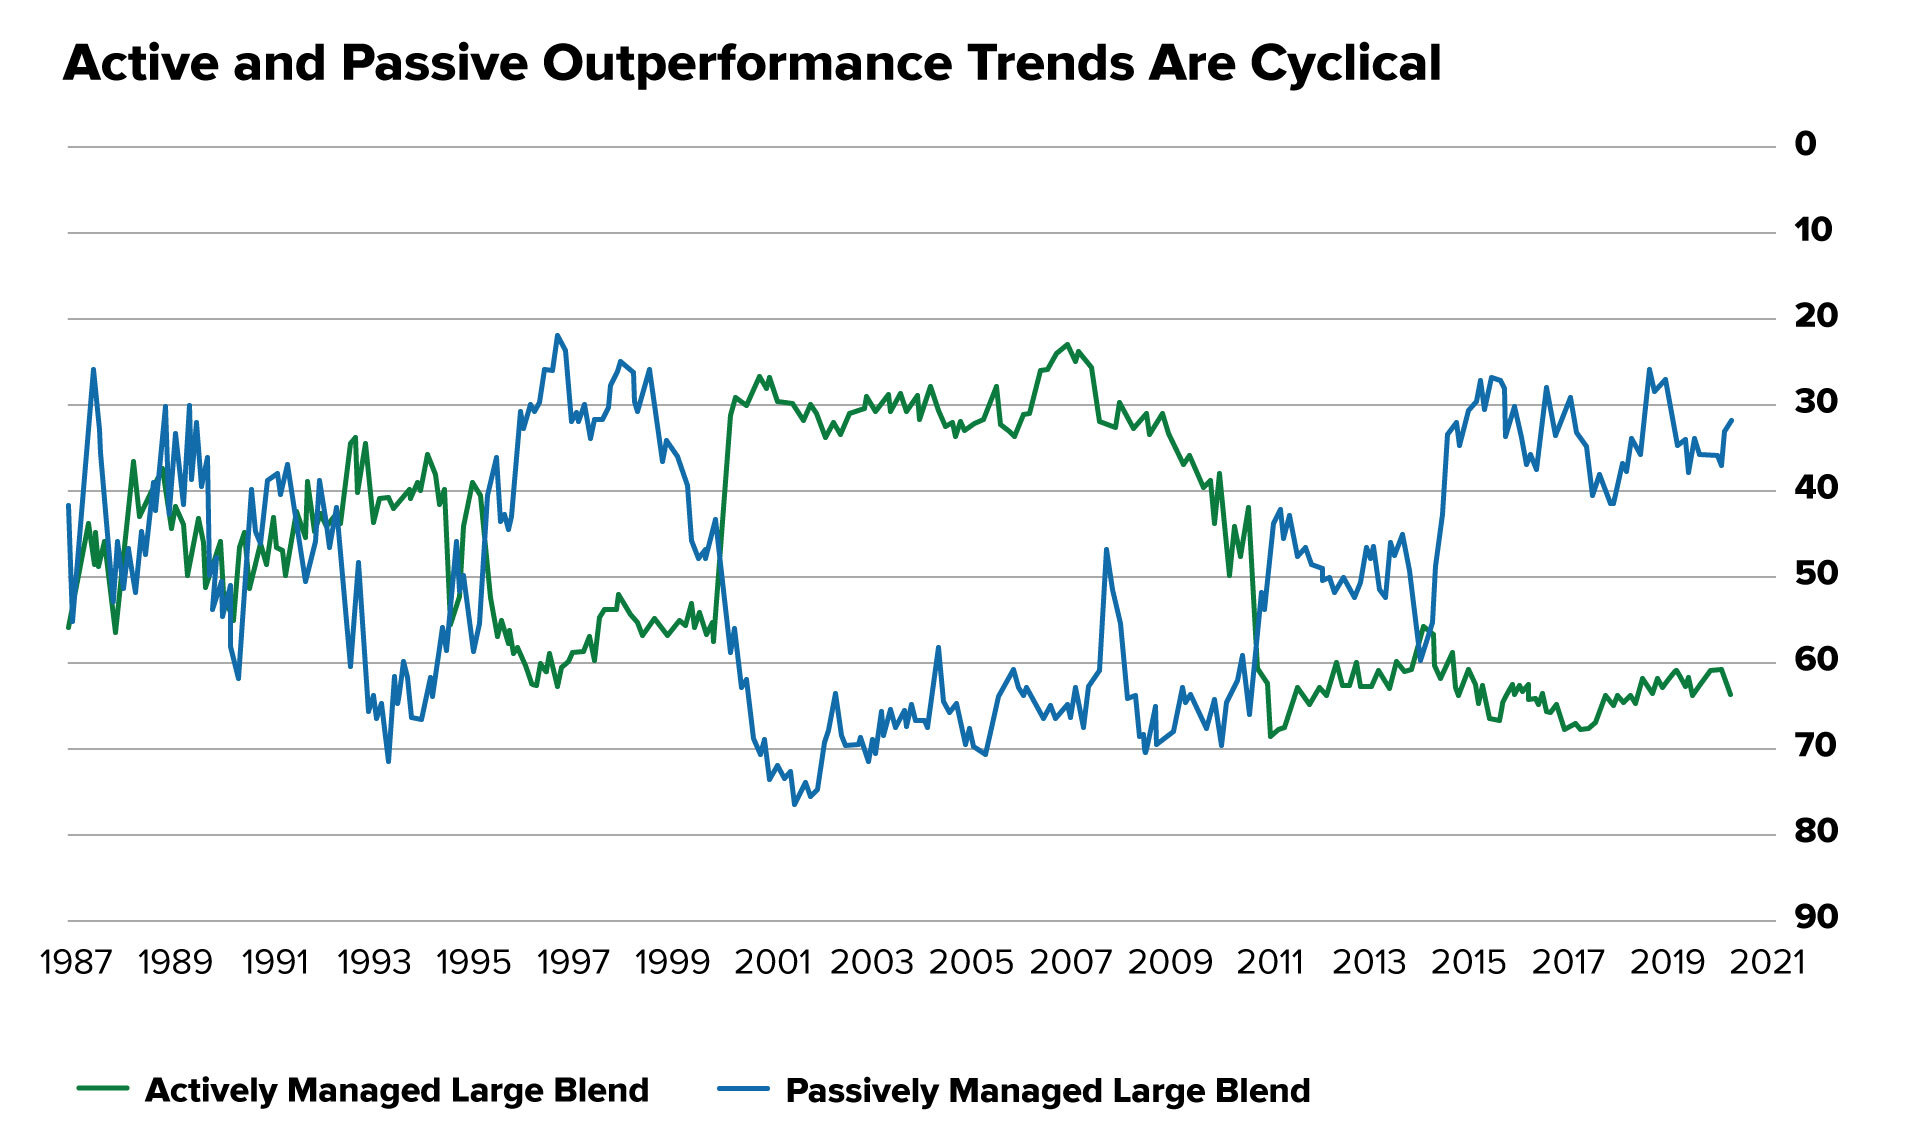 Active-and-passive-outperformance-trends-are-cyclical